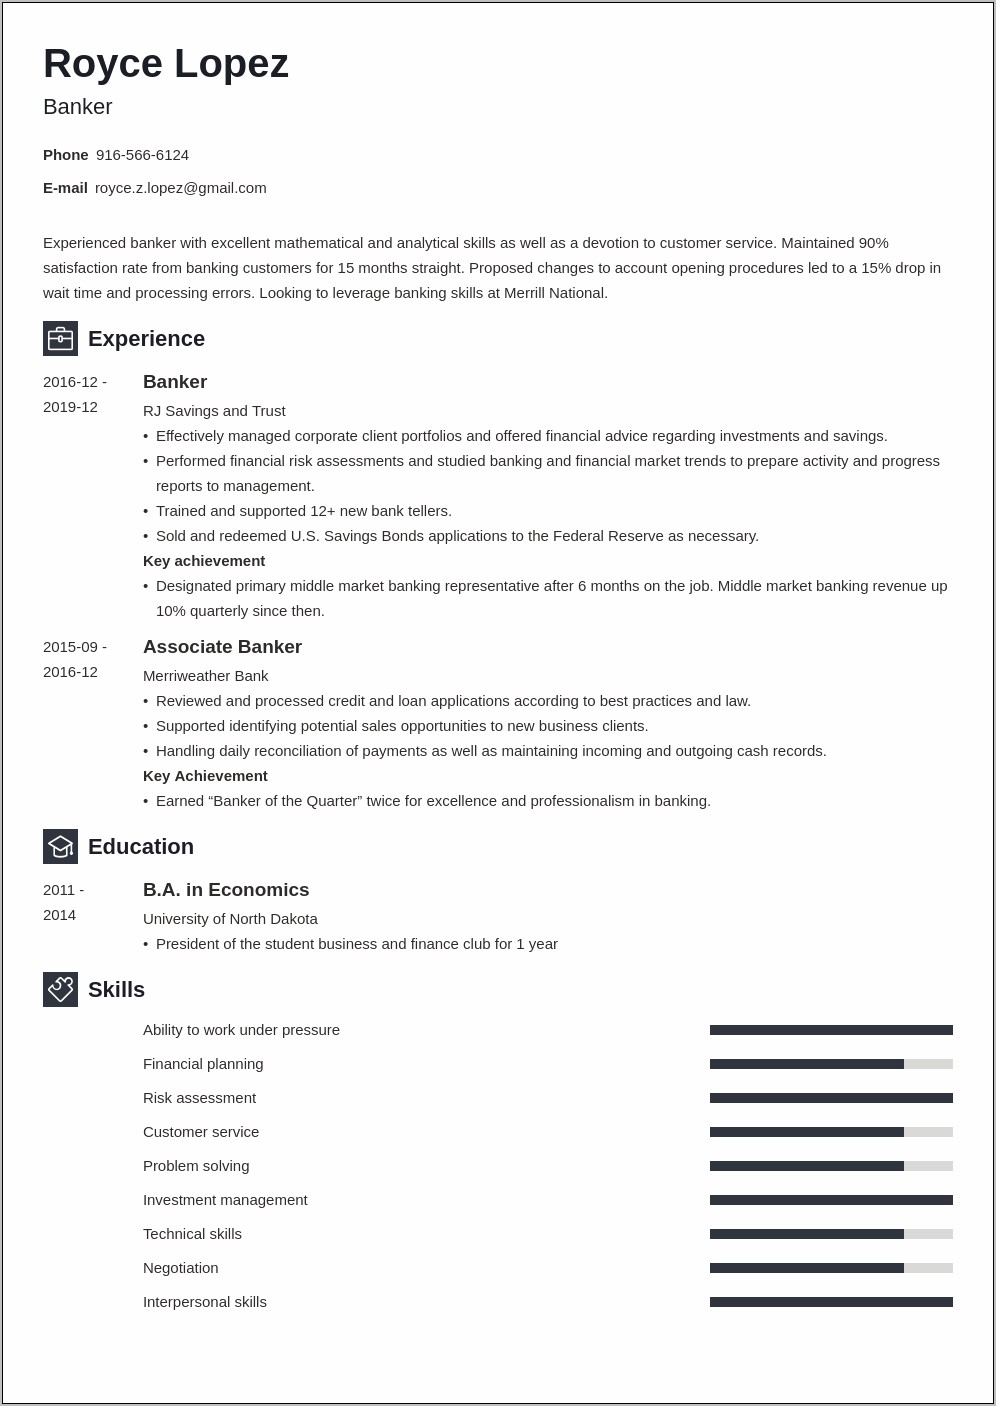 Example Of Professional Business Resume To Obtain Loan